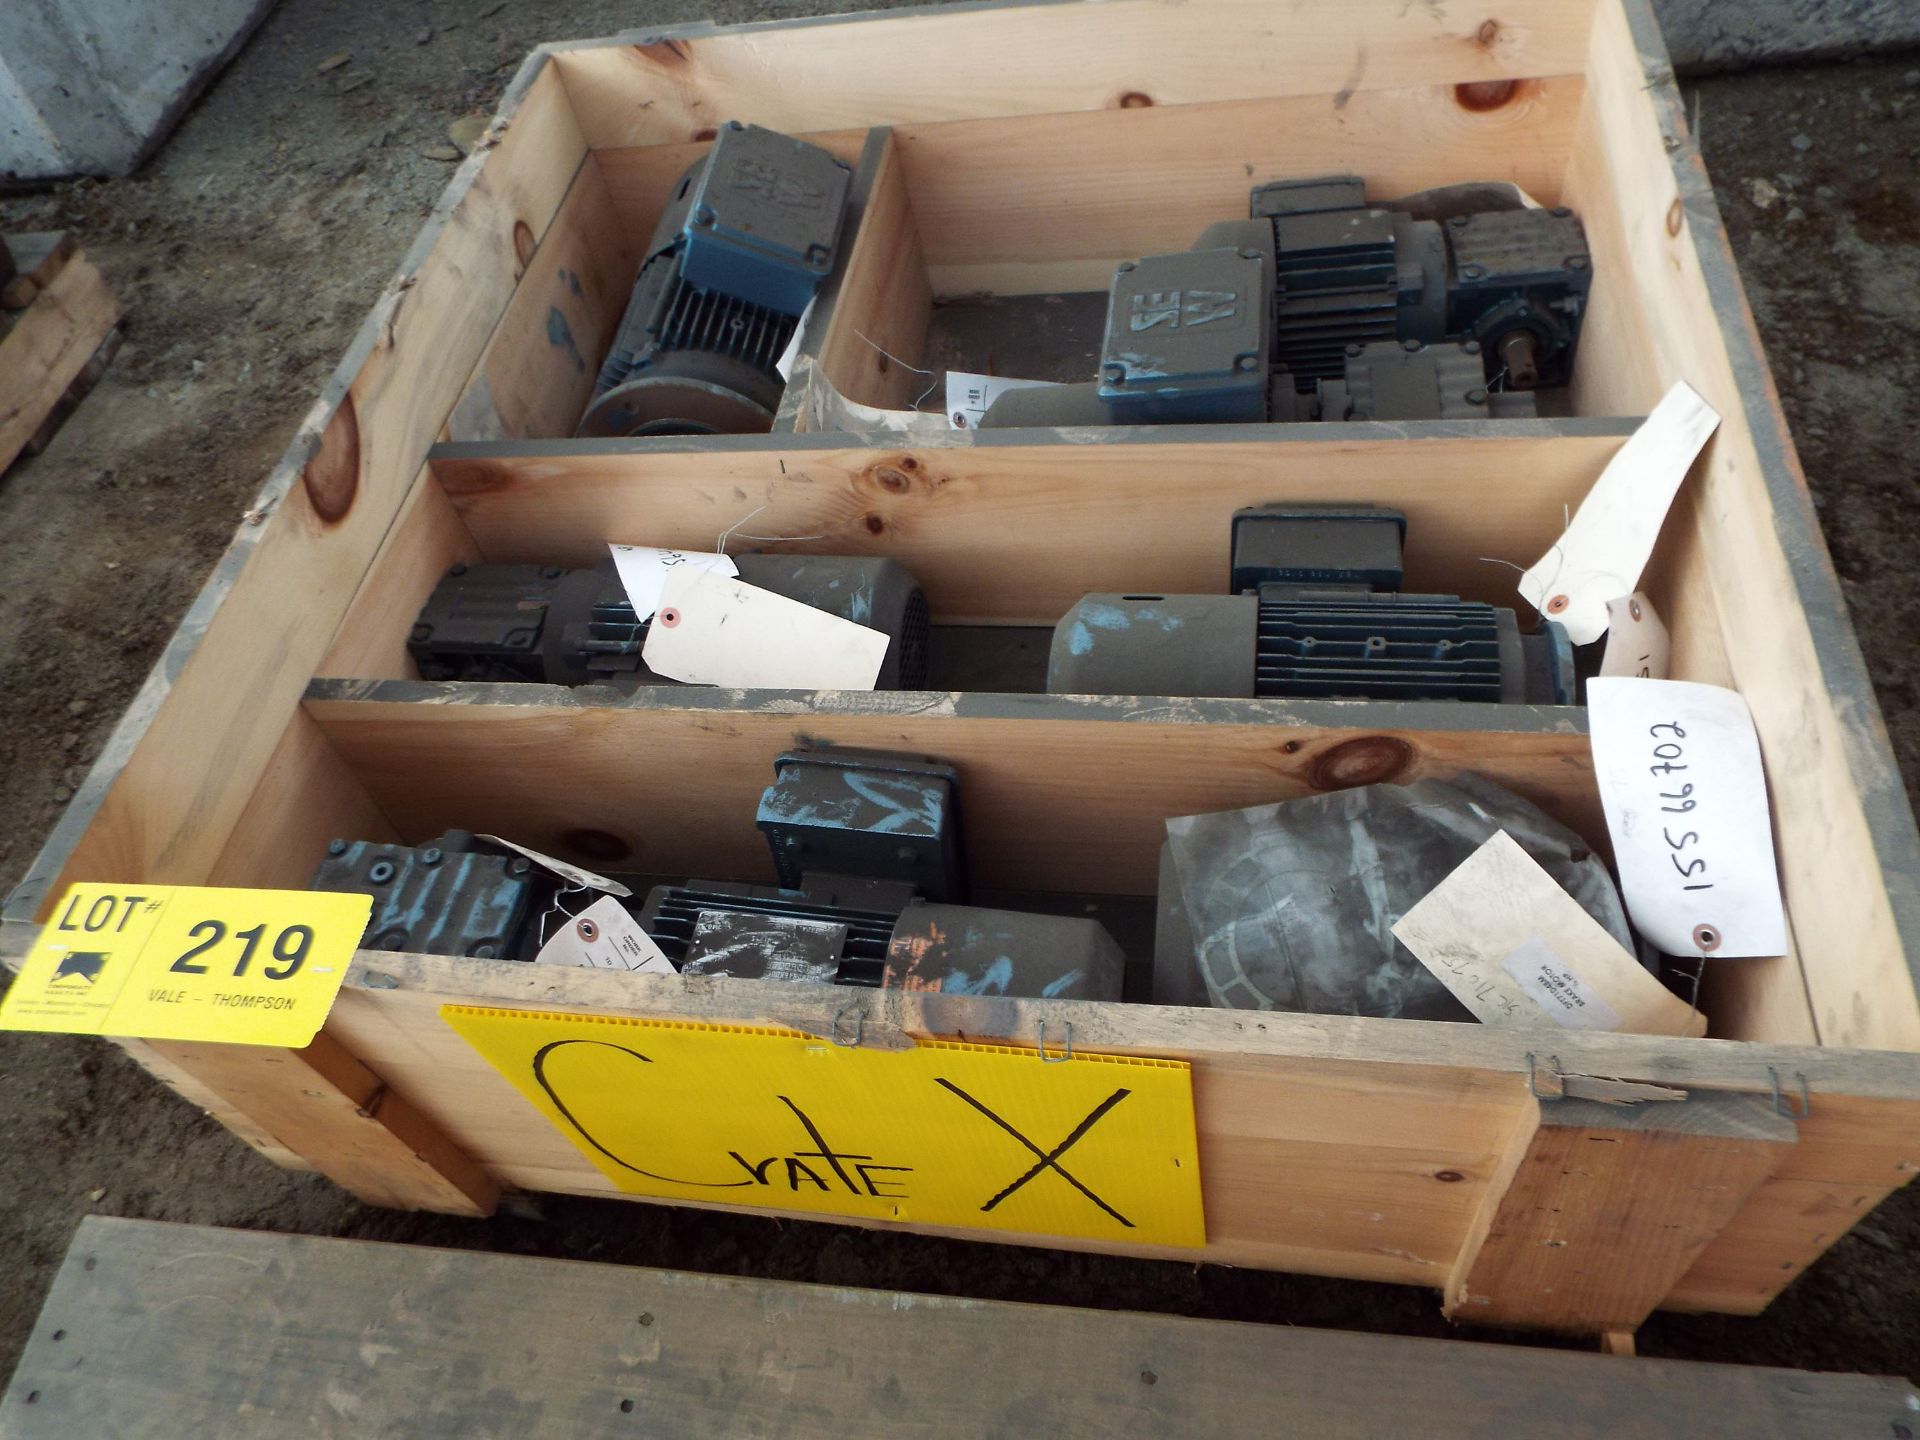 LOT/ CONTENTS OF SKID - (6) SEW EURODRIVE GEARBOXES WITH 1 HP, 330/575V, 1700 RPM, 3-PHASE MOTORS (